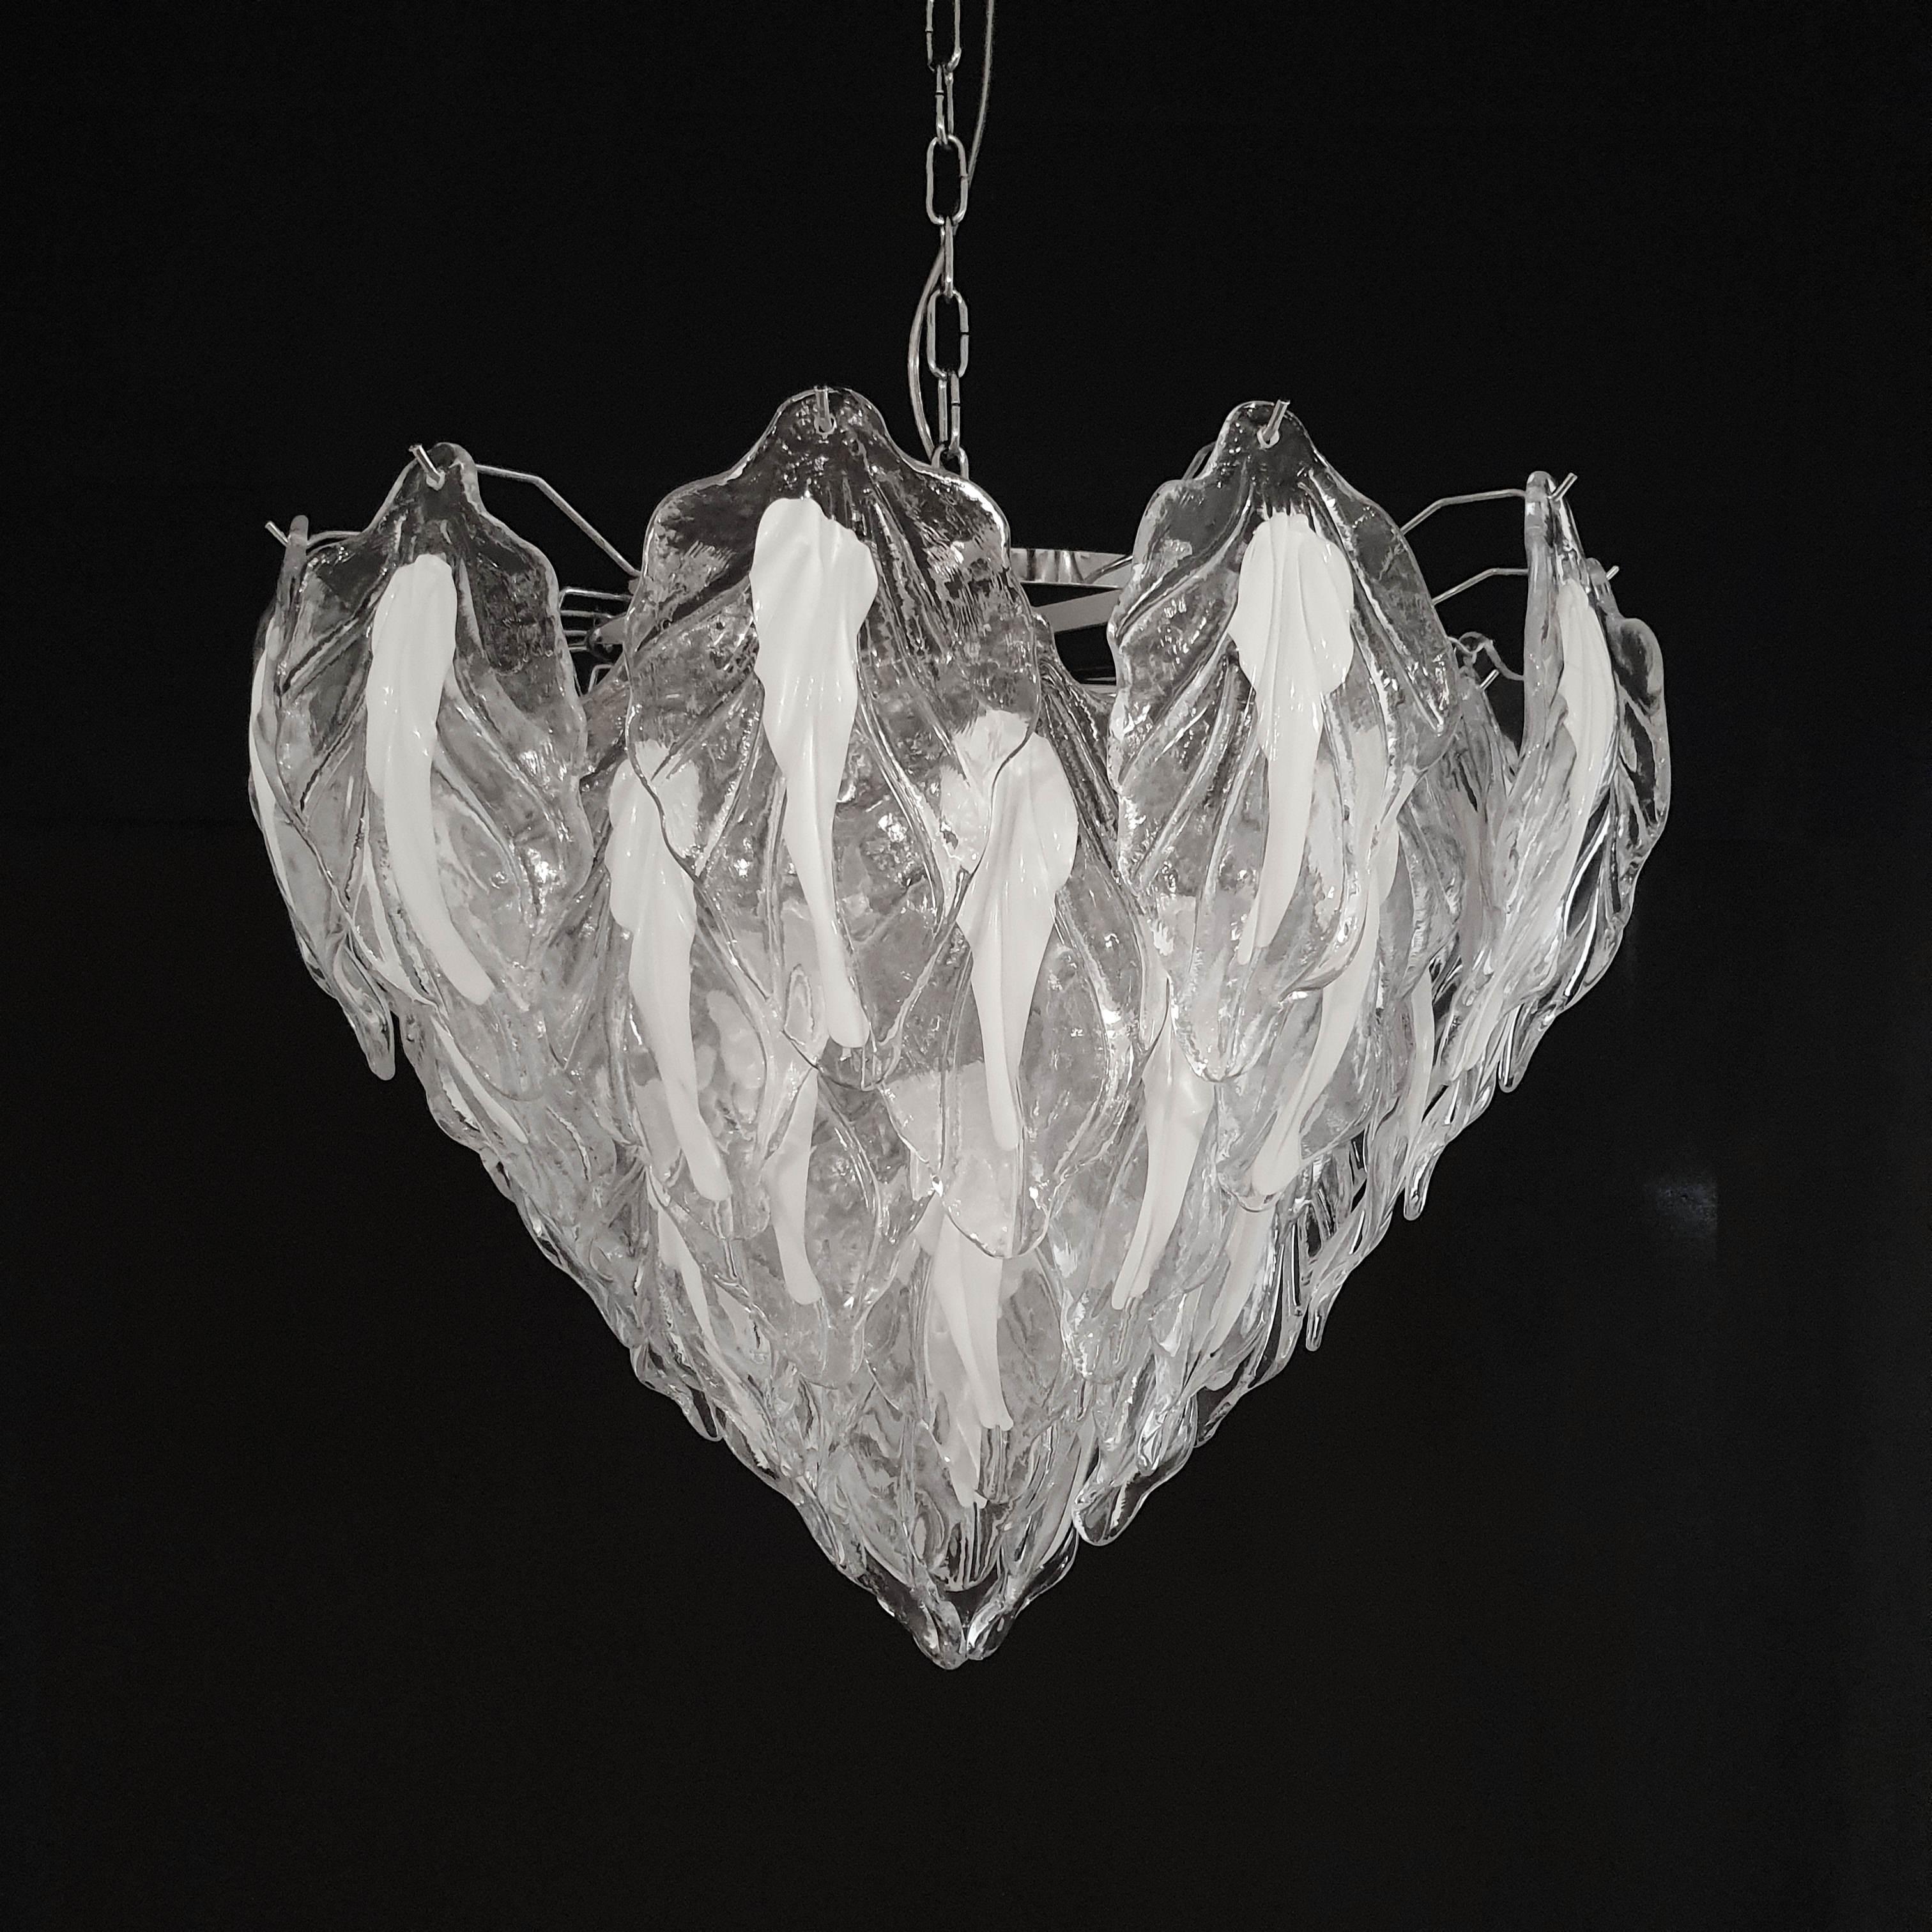 Italian chandelier shown with clear and milky white hand blown Murano glass leaves mounted on chrome finish metal frame / Designed by Fabio Bergomi for Fabio Ltd, inspired by Mazzega / Made in Italy
5 lights / E26 or E27 type / max 60W